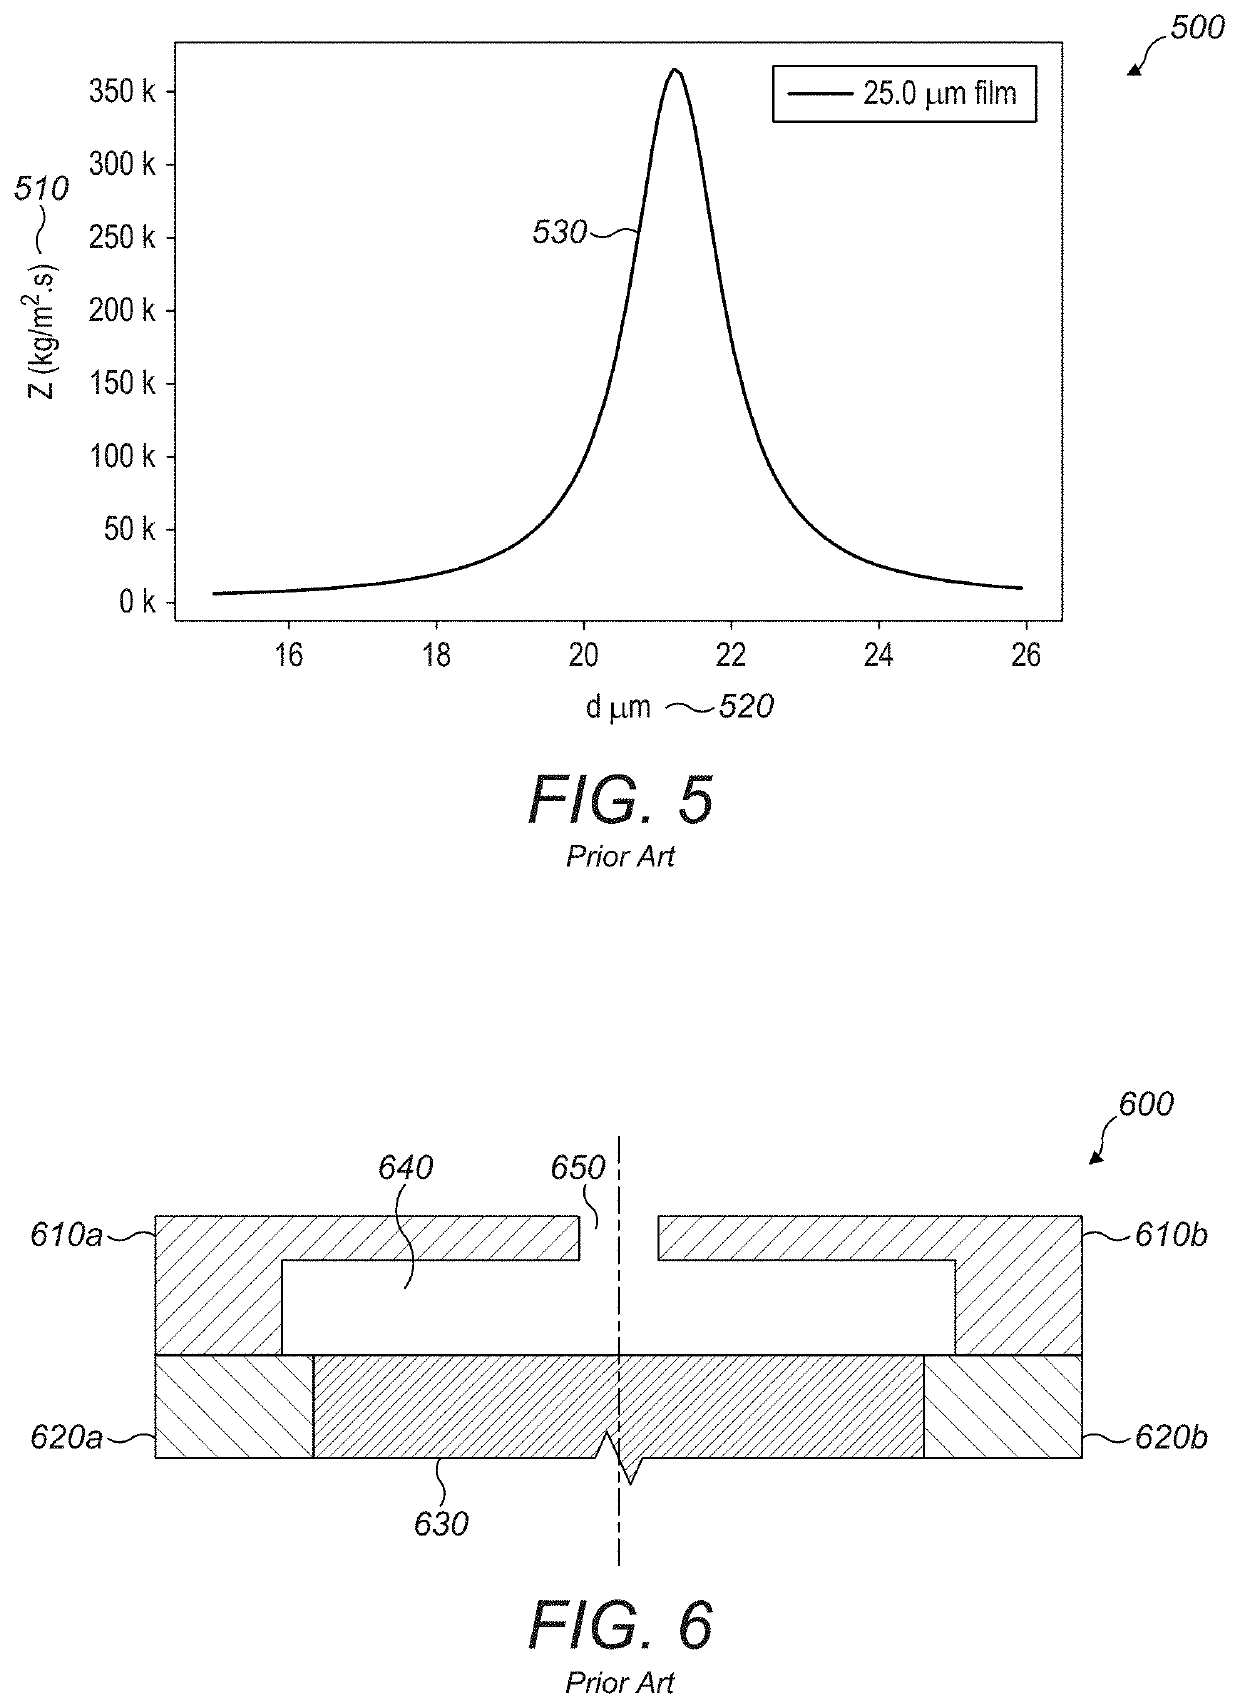 Blocking Plate Structure for Improved Acoustic Transmission Efficiency